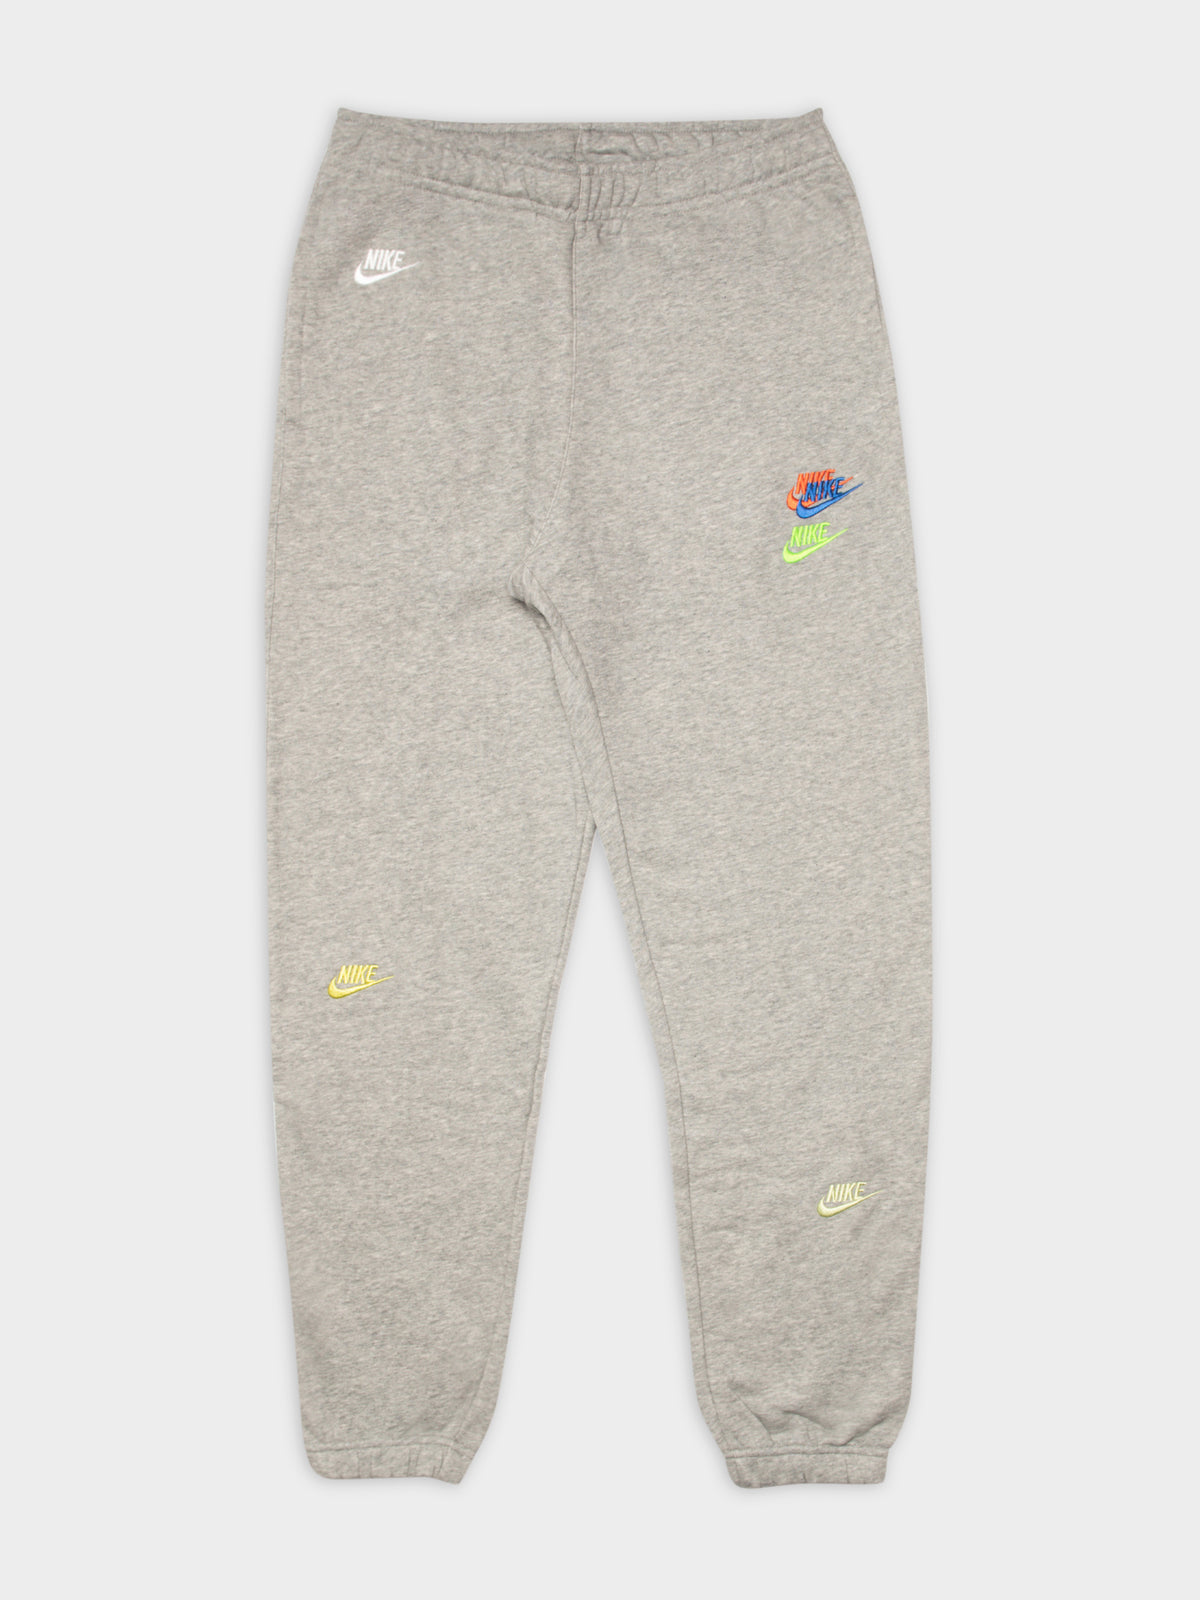 NSW French Terry Track Pants in Dark Grey Heather